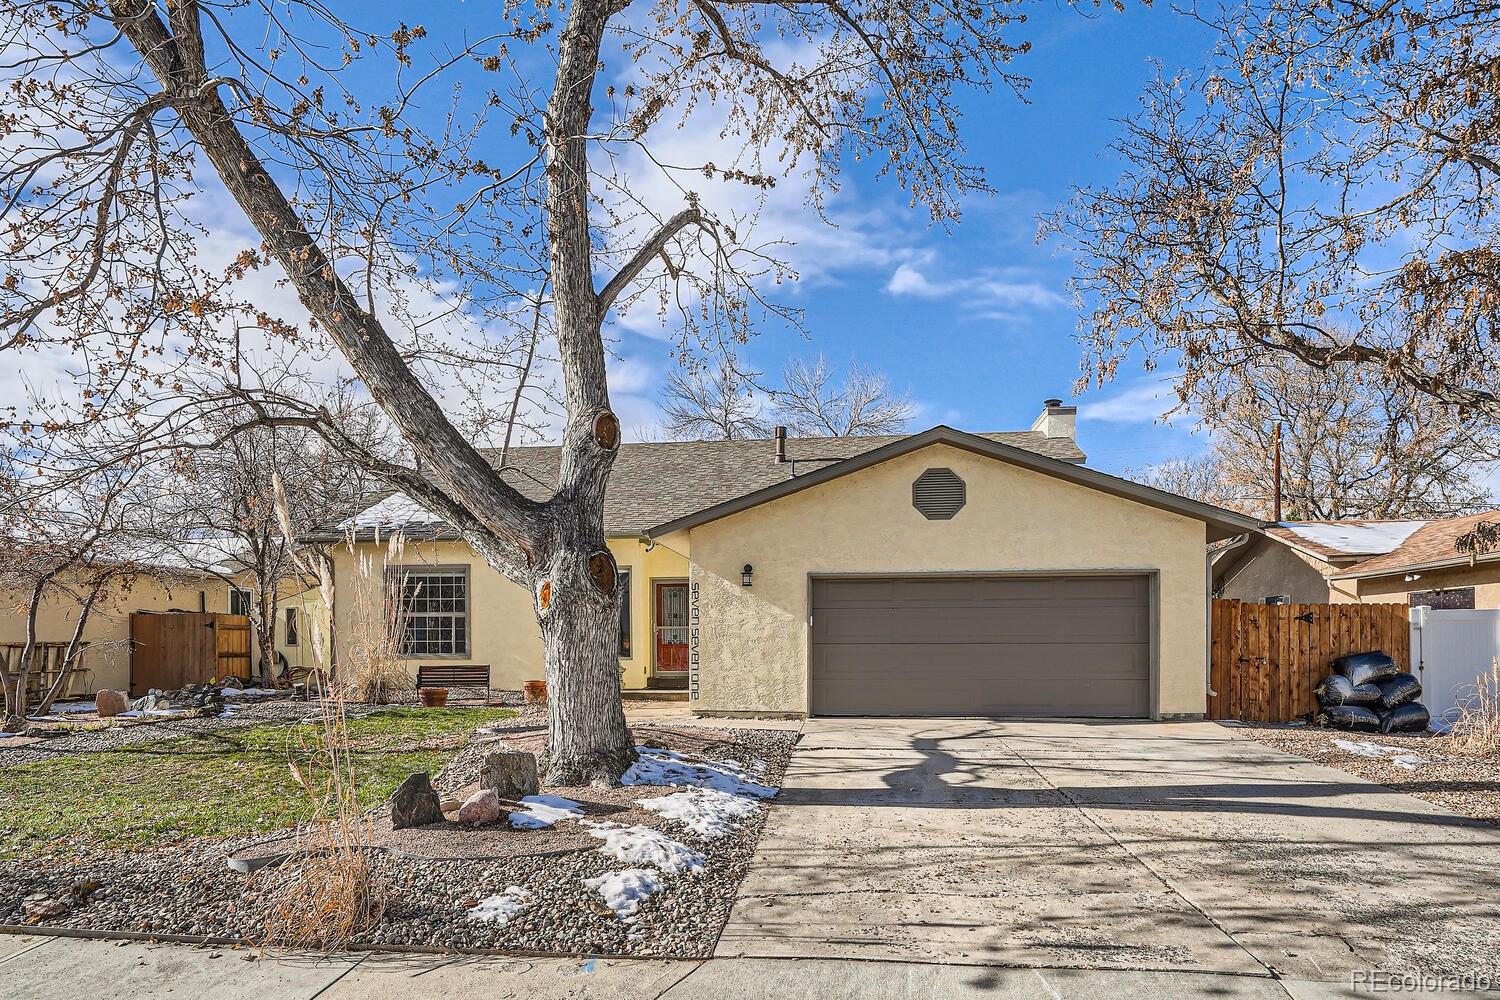 Report Image for 771  Cottonwood Drive,Broomfield, Colorado